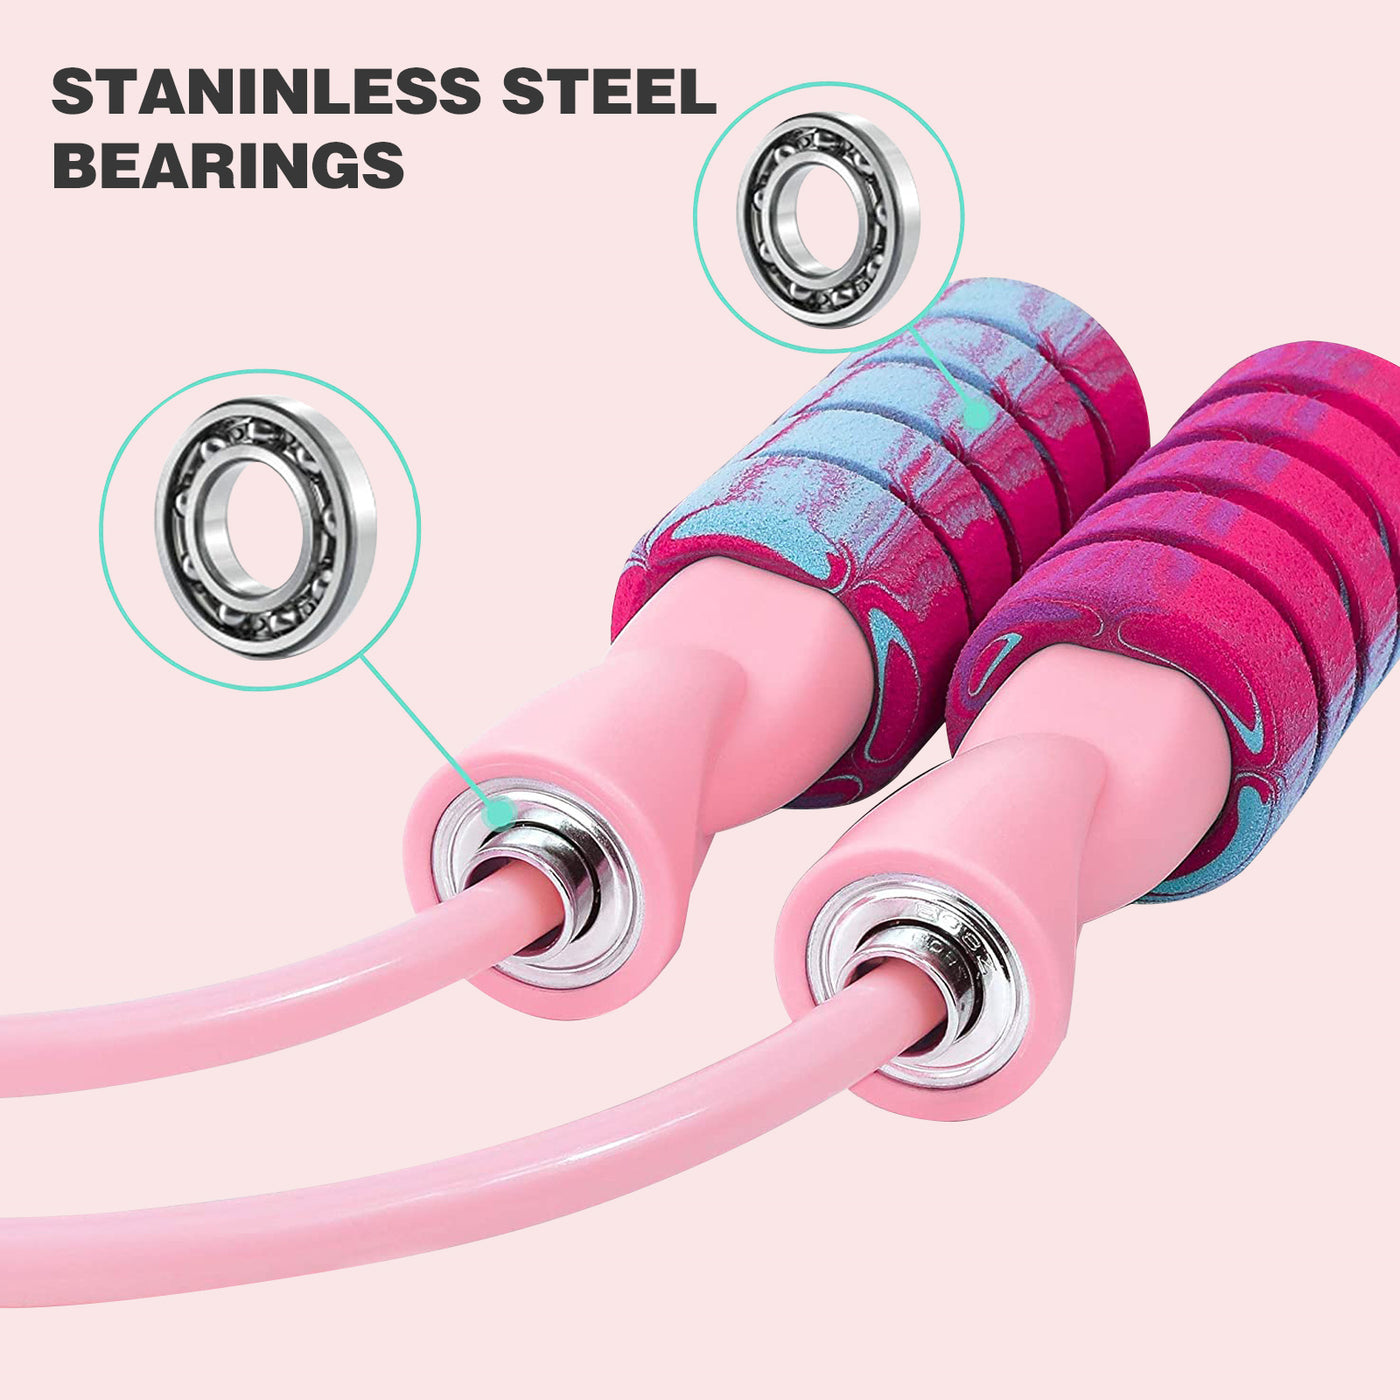 jump rope with staininless stell bearings